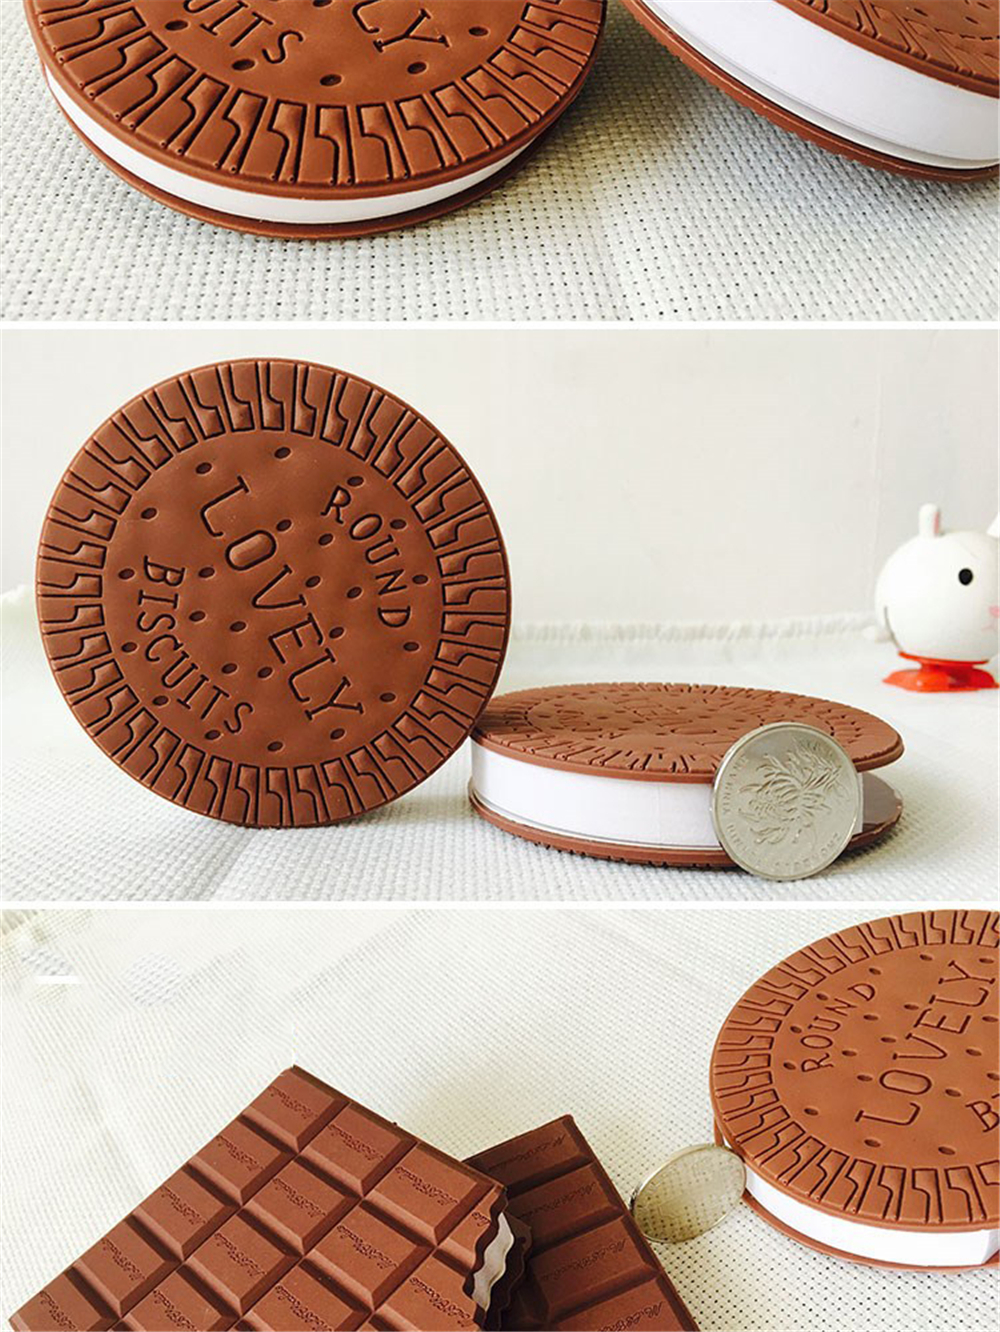 Chocolate-Stickers-Book-Creative-Chocolate-Cookies-Shape-Memo-Sticker-Pad-Dairy-Note-Notebook-For-Of-1764050-9